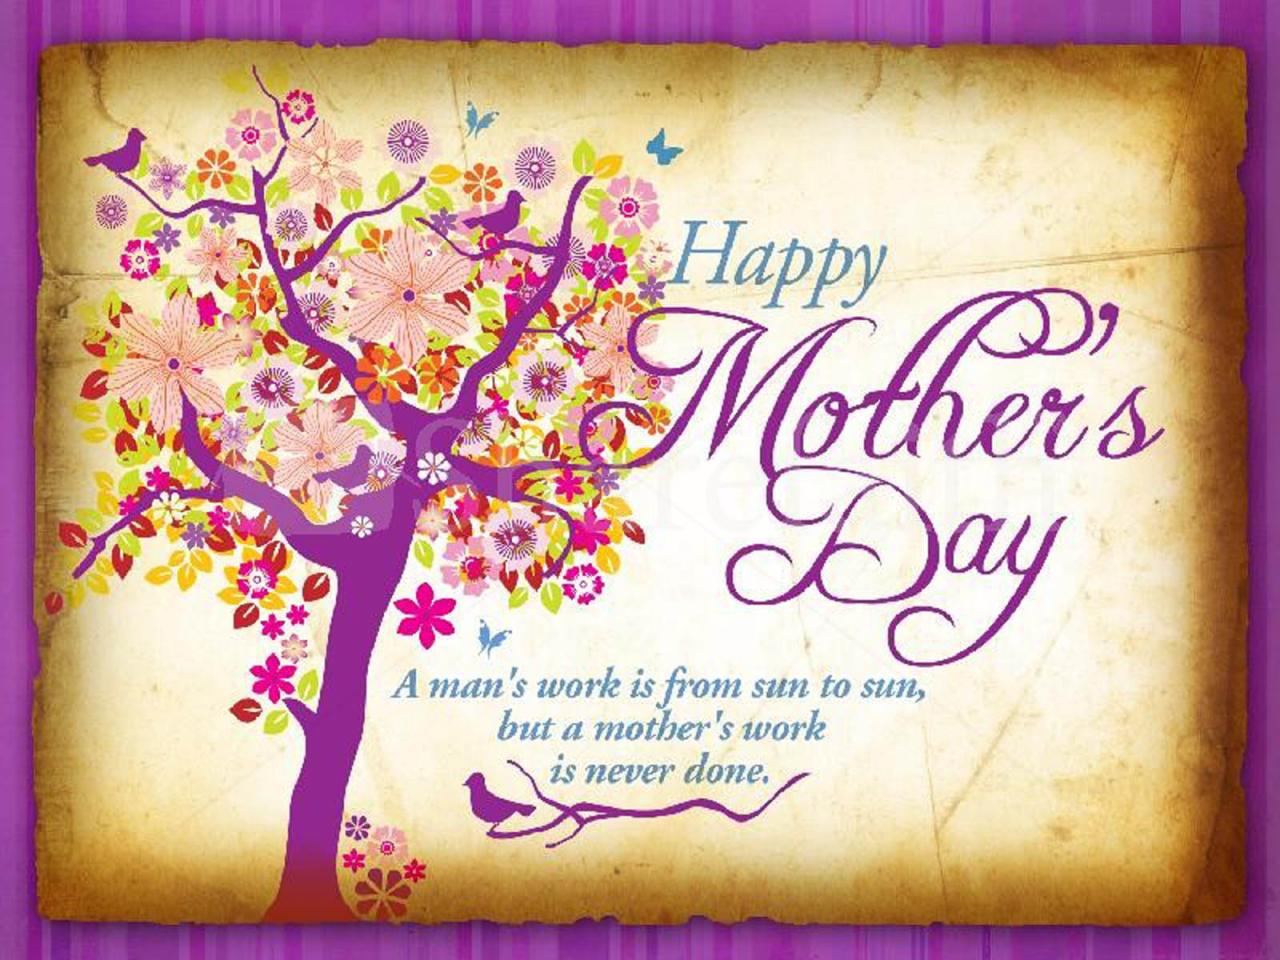 Mothers greetings messages wishes mother easyday mom snydle